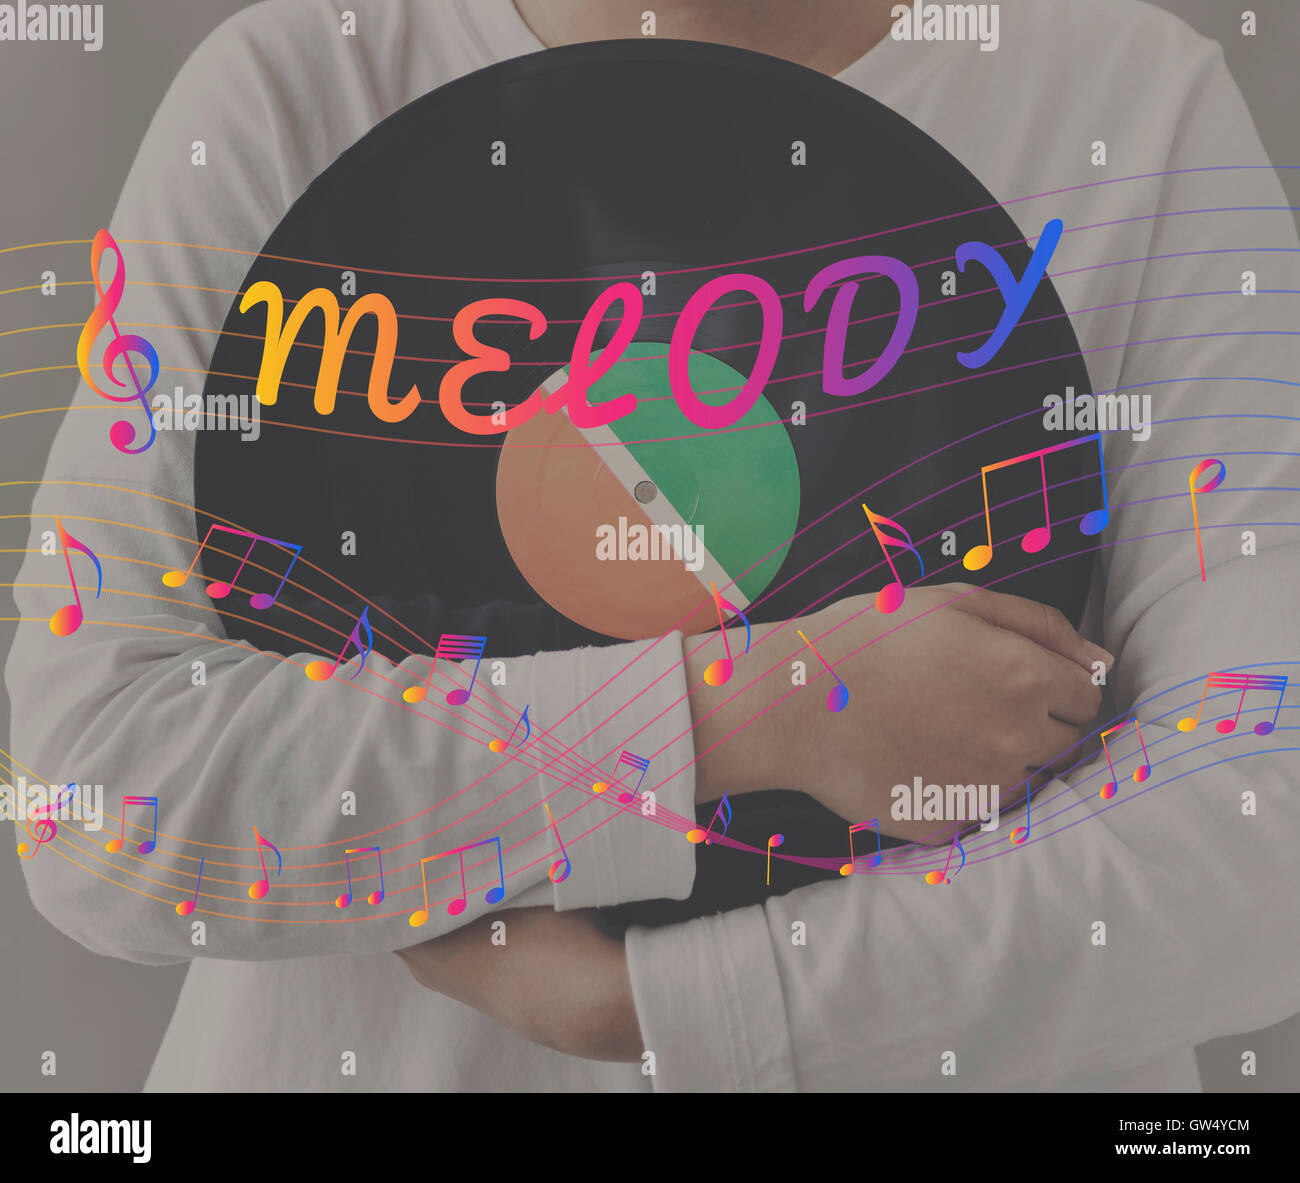 Melody Music Note Rhythm Graphic Concept Stock Photo